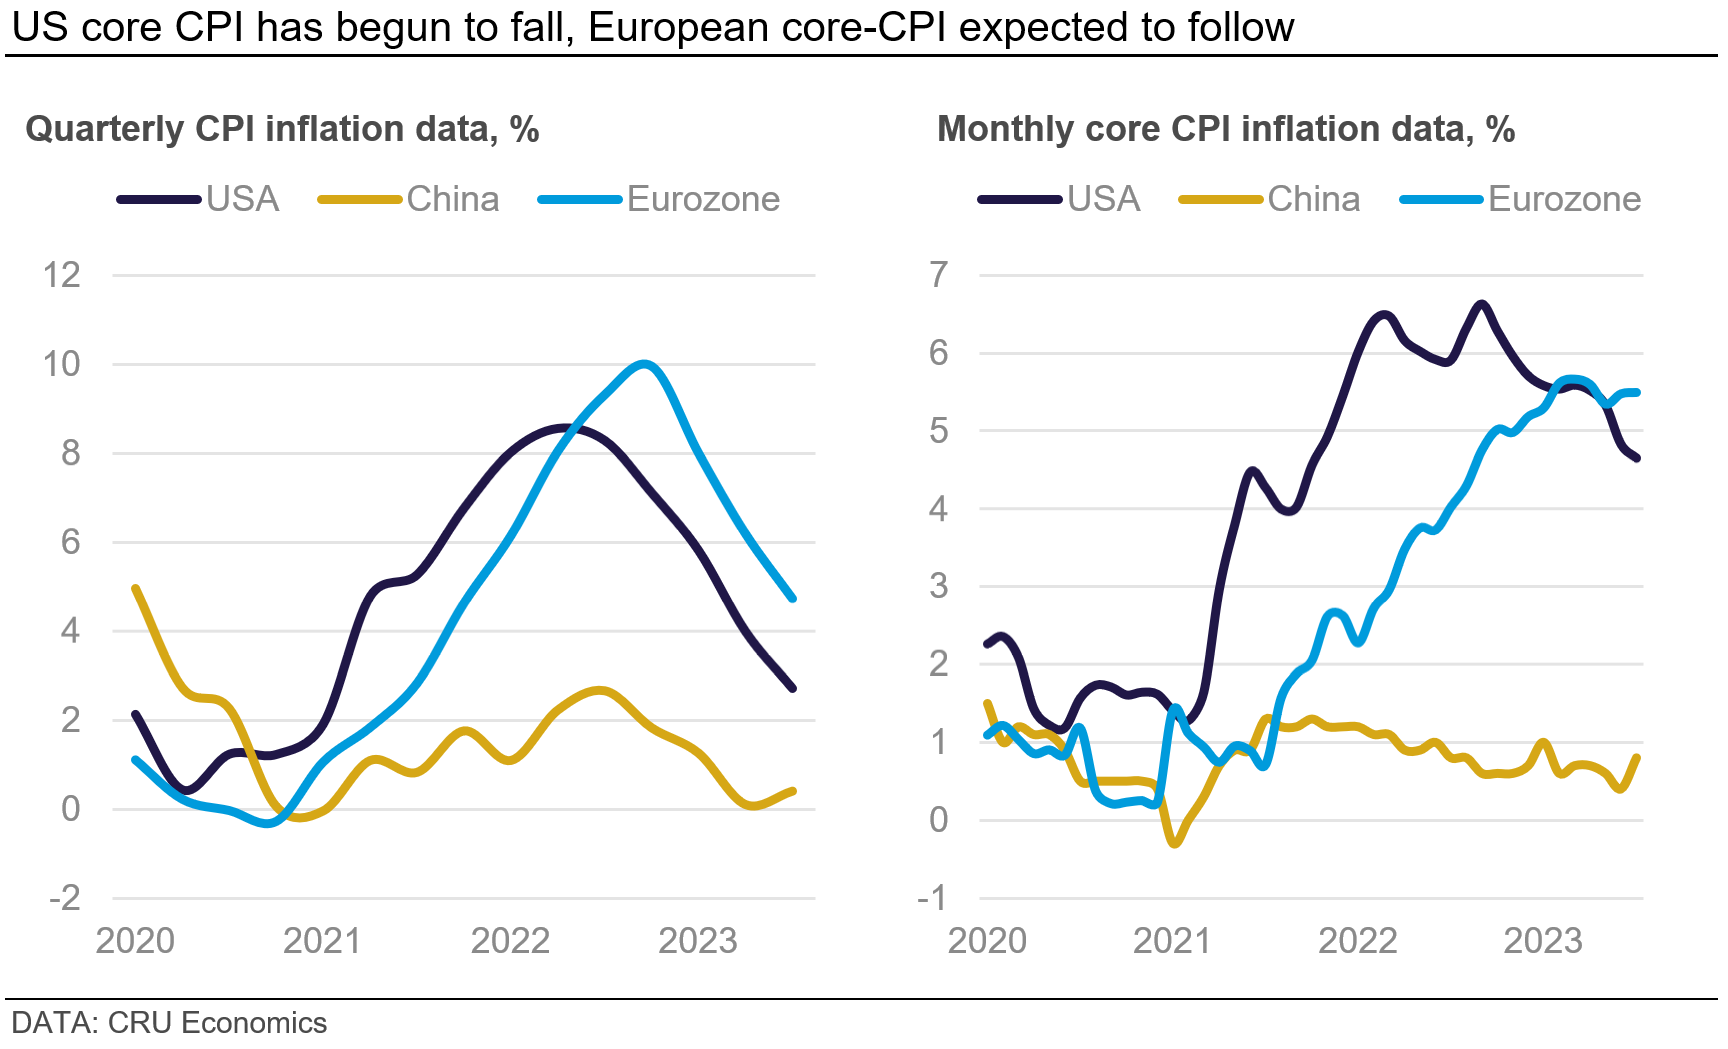 Graph showing that US core CPI has begun to fall, European core-CPI expected to follow